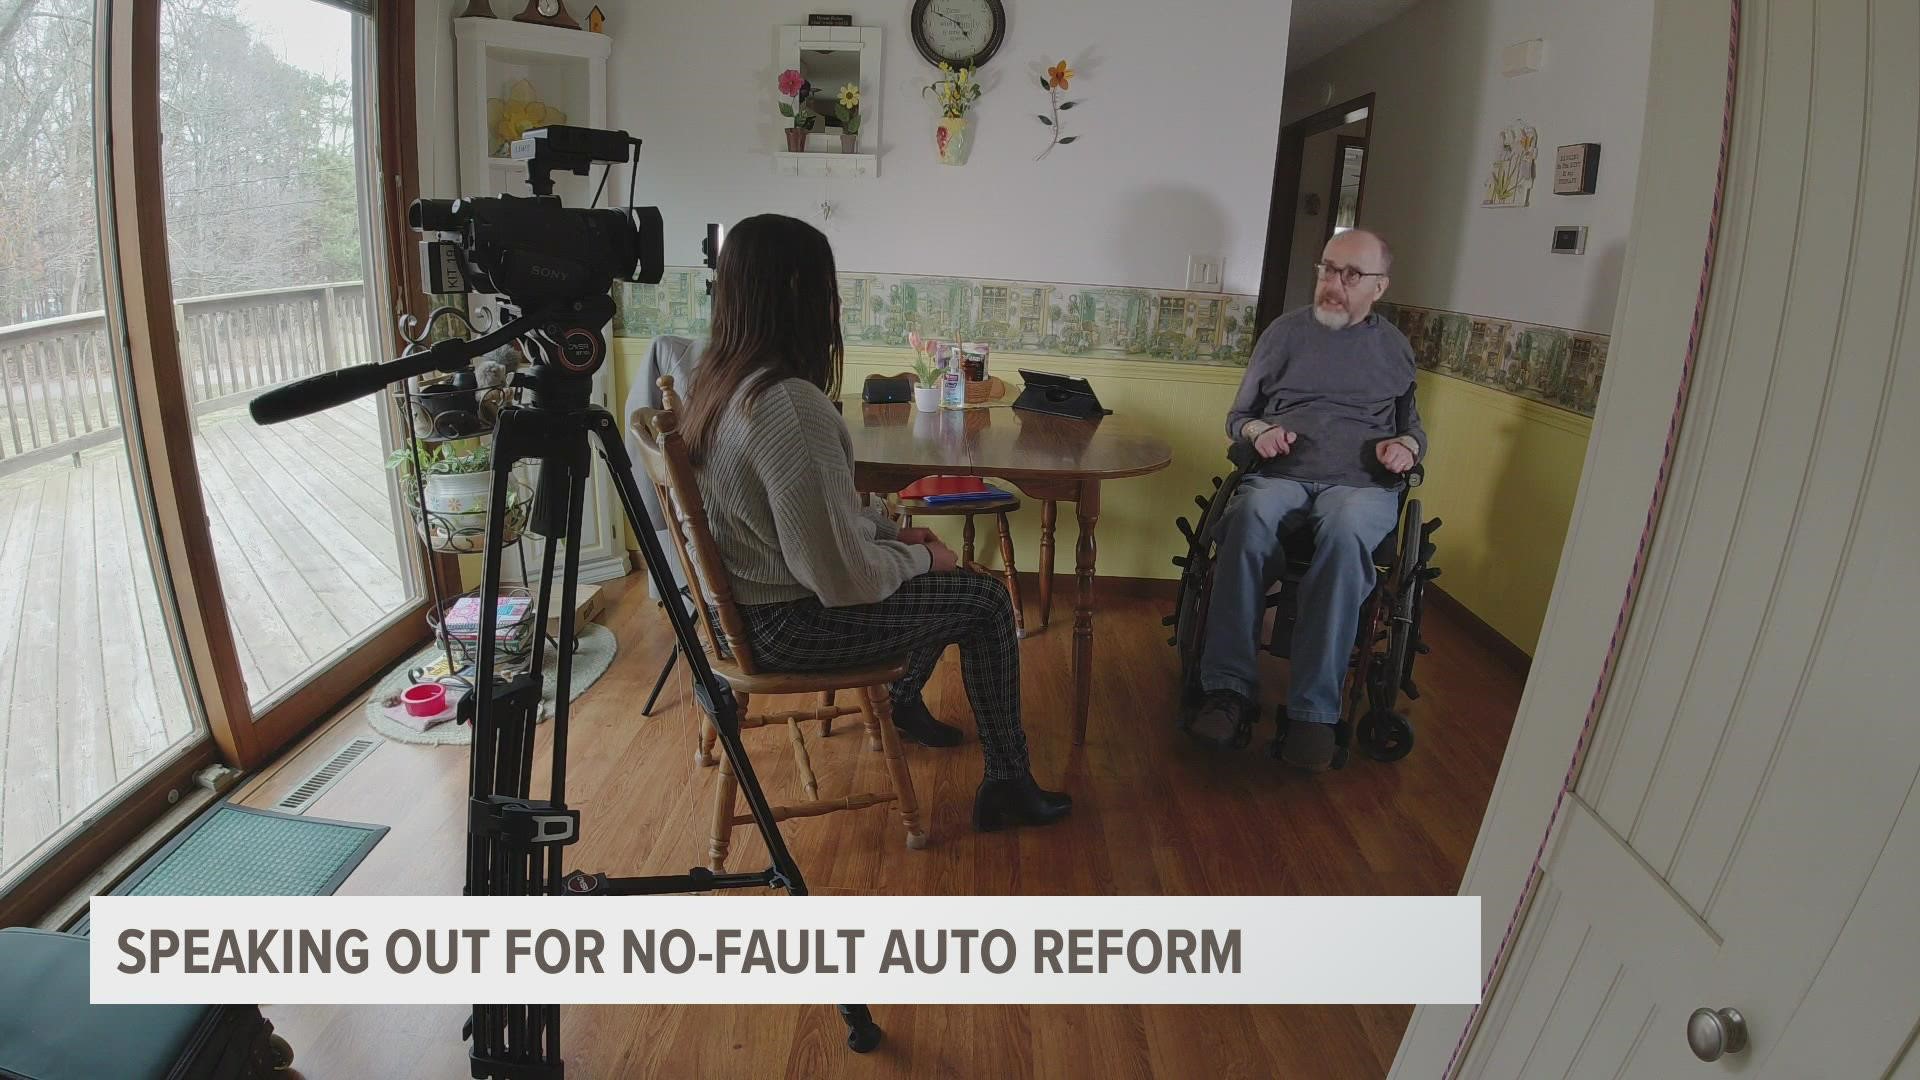 Mike Harold has been paralyzed for the last 40 years, but it's only been in the last year that he's had to shell out $26,000 to keep his care team coming.